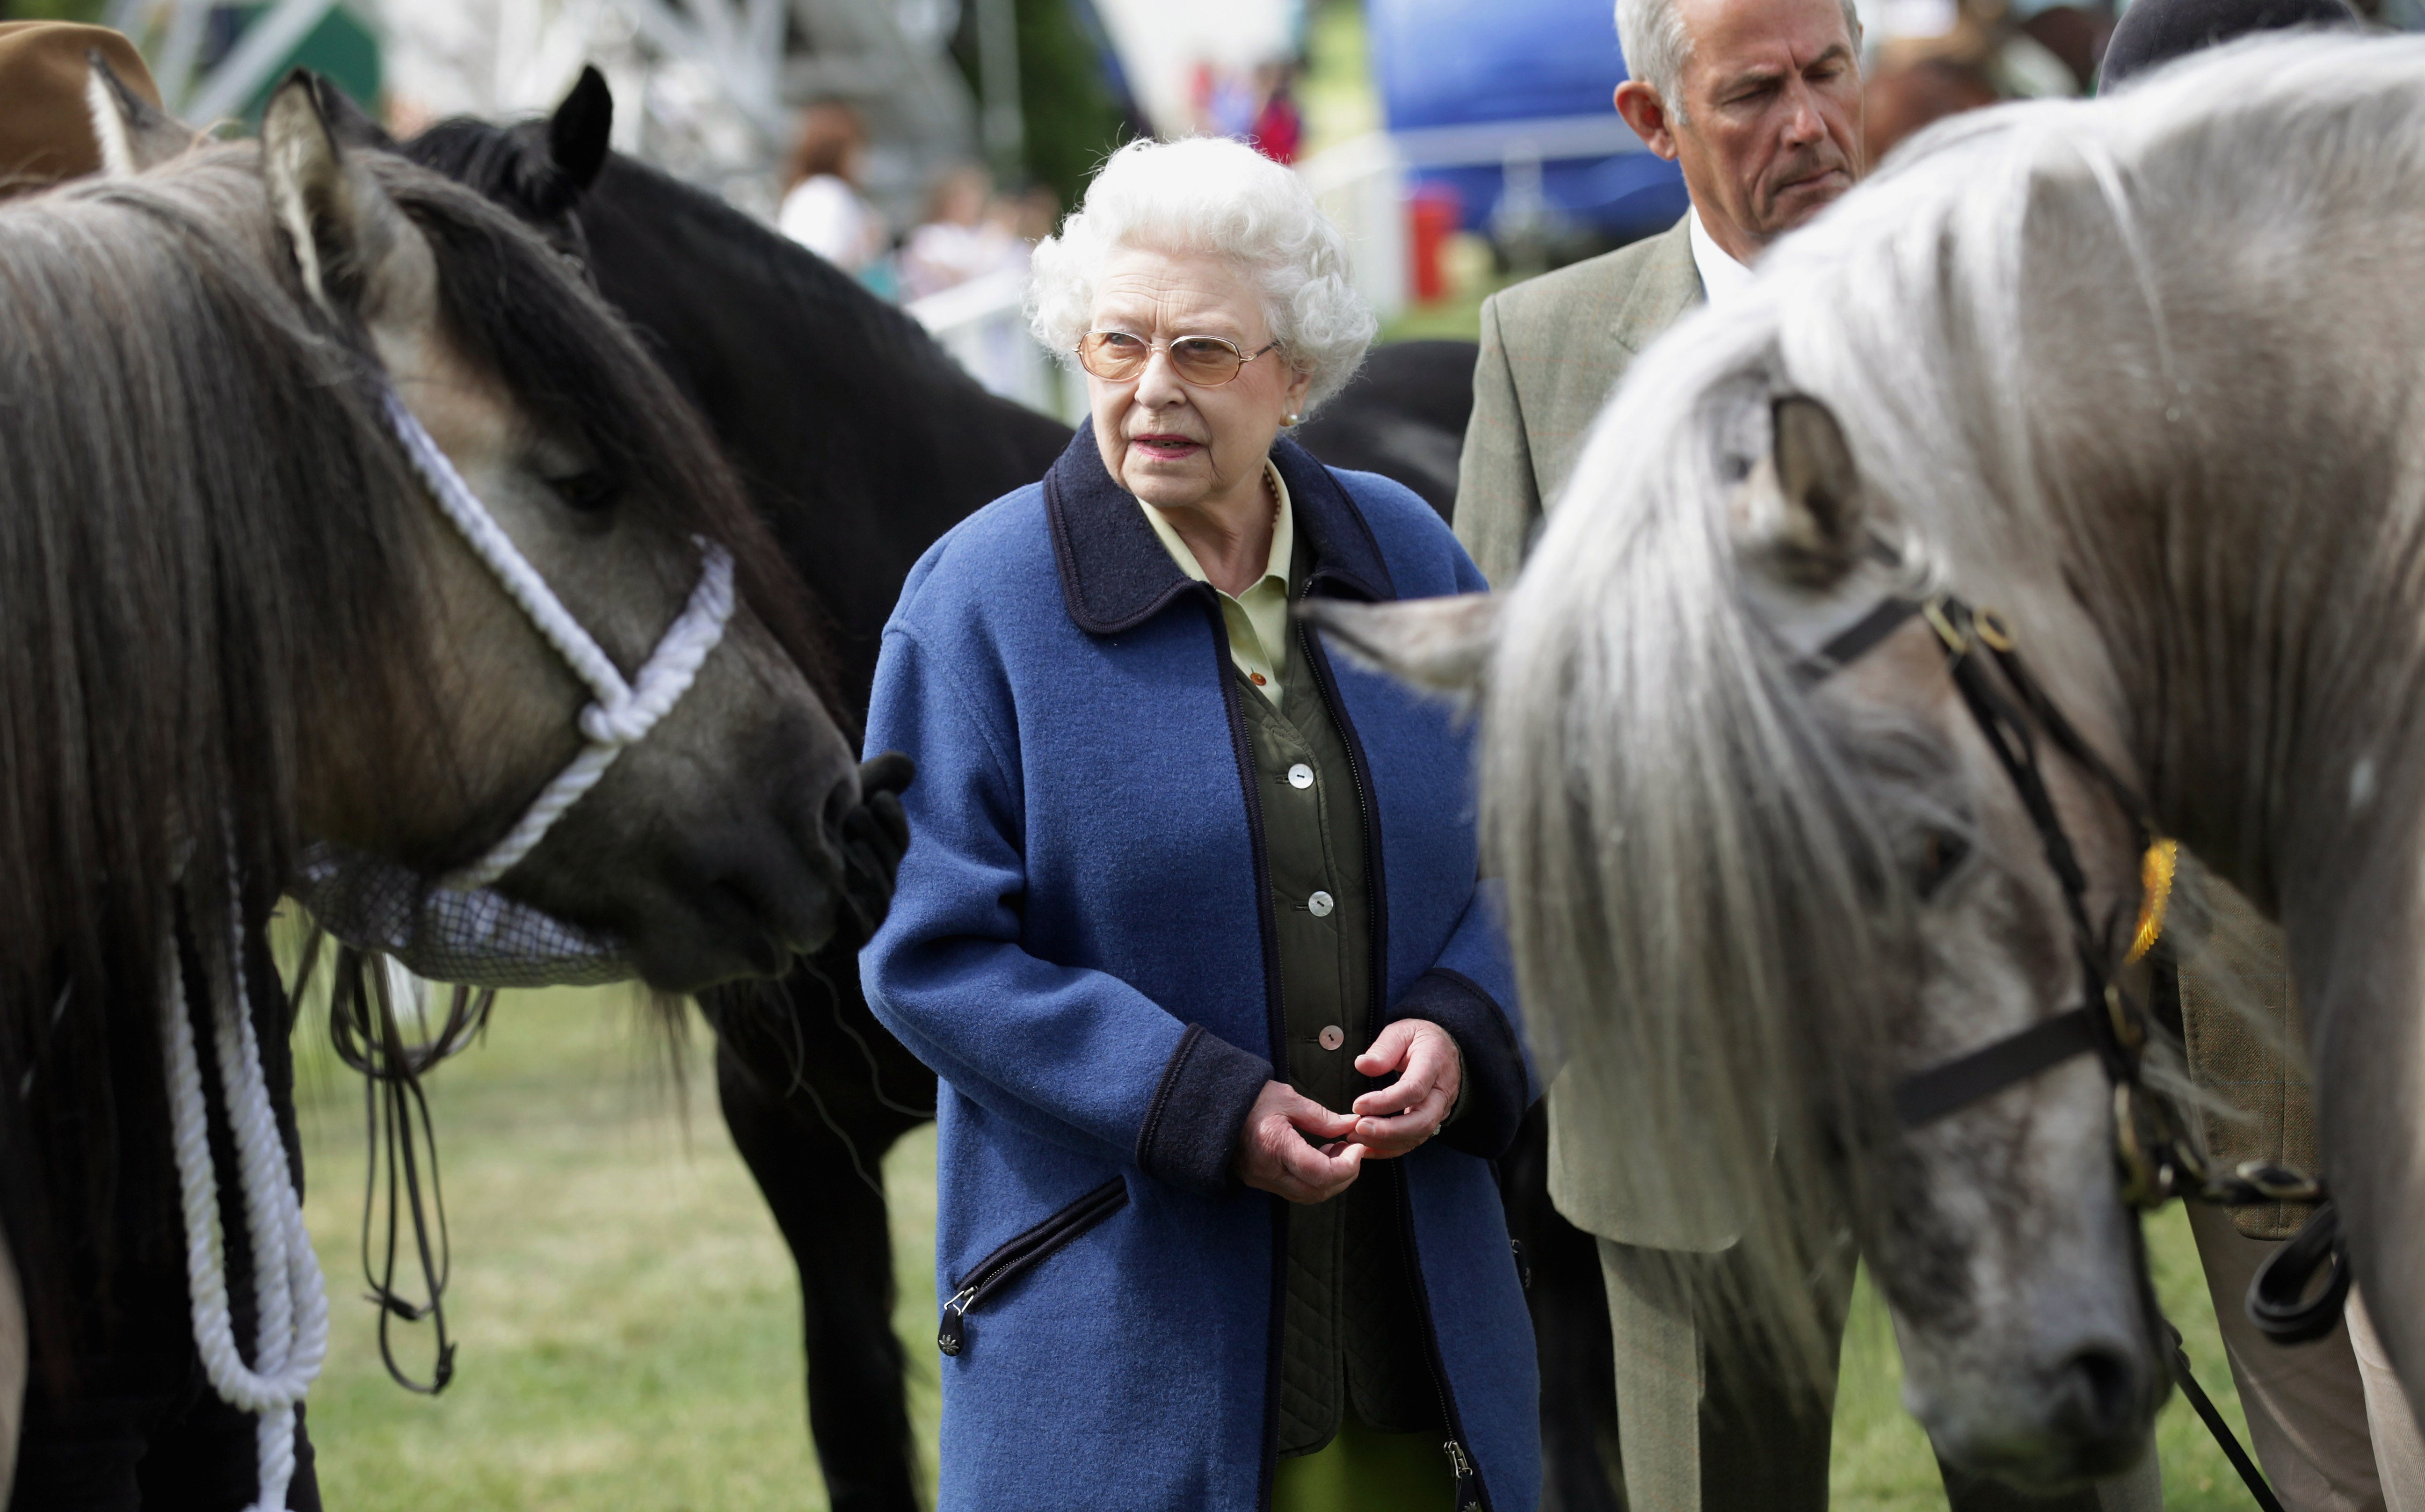 The Queen at the Windsor Horse Show in 2011